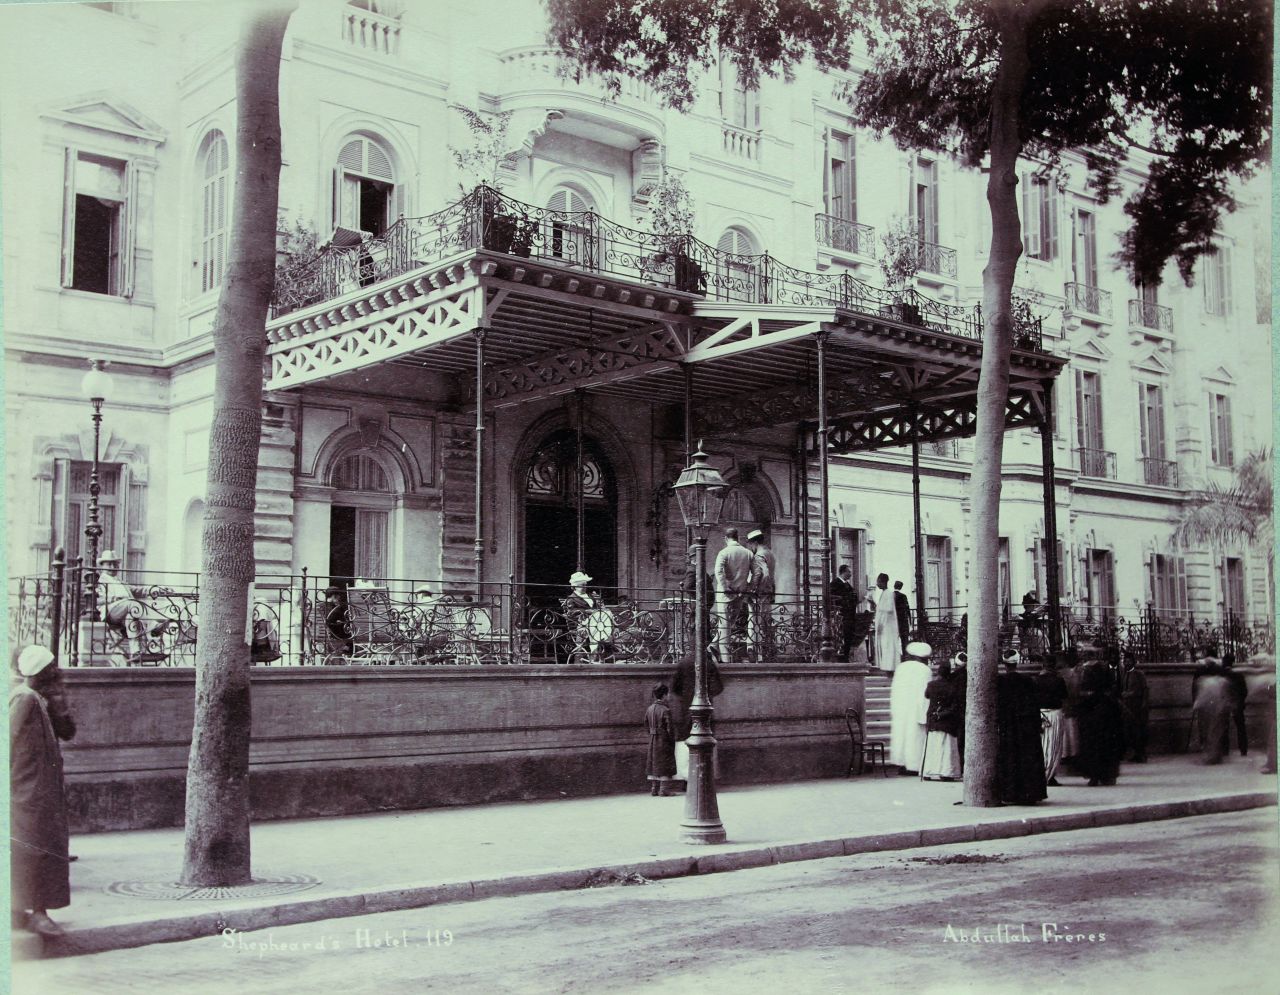 It also attracted royalty, aristocracy diplomats, and the bourgeoisie with its luxurious decor, excellent cuisine, and superb service which matched Europe's most exclusive establishments. This image shows the Shepherd's Hotel in Cairo, where many Orient Express passengers would stay. 